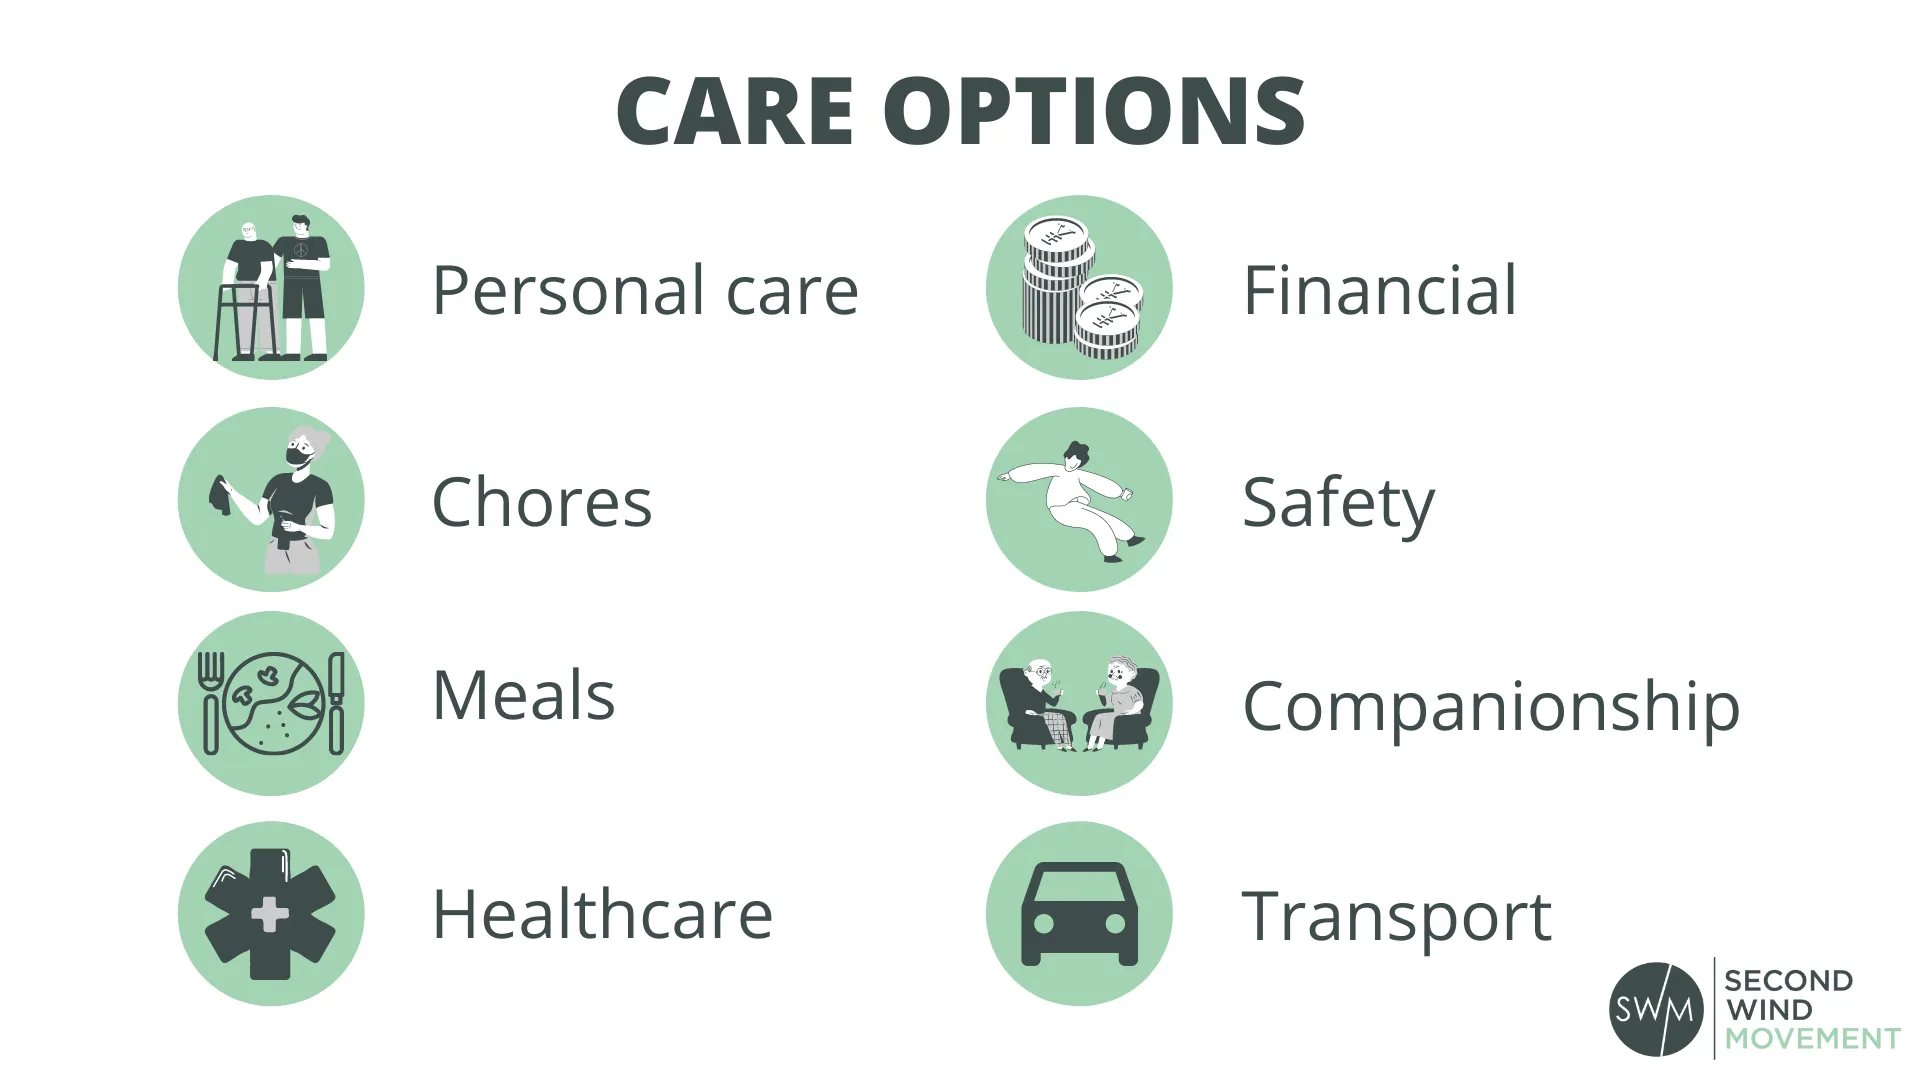 you need to consider which care you'll require help with, such as personal care, chores, meals, health care, financial, safety, transportation, or just companionship